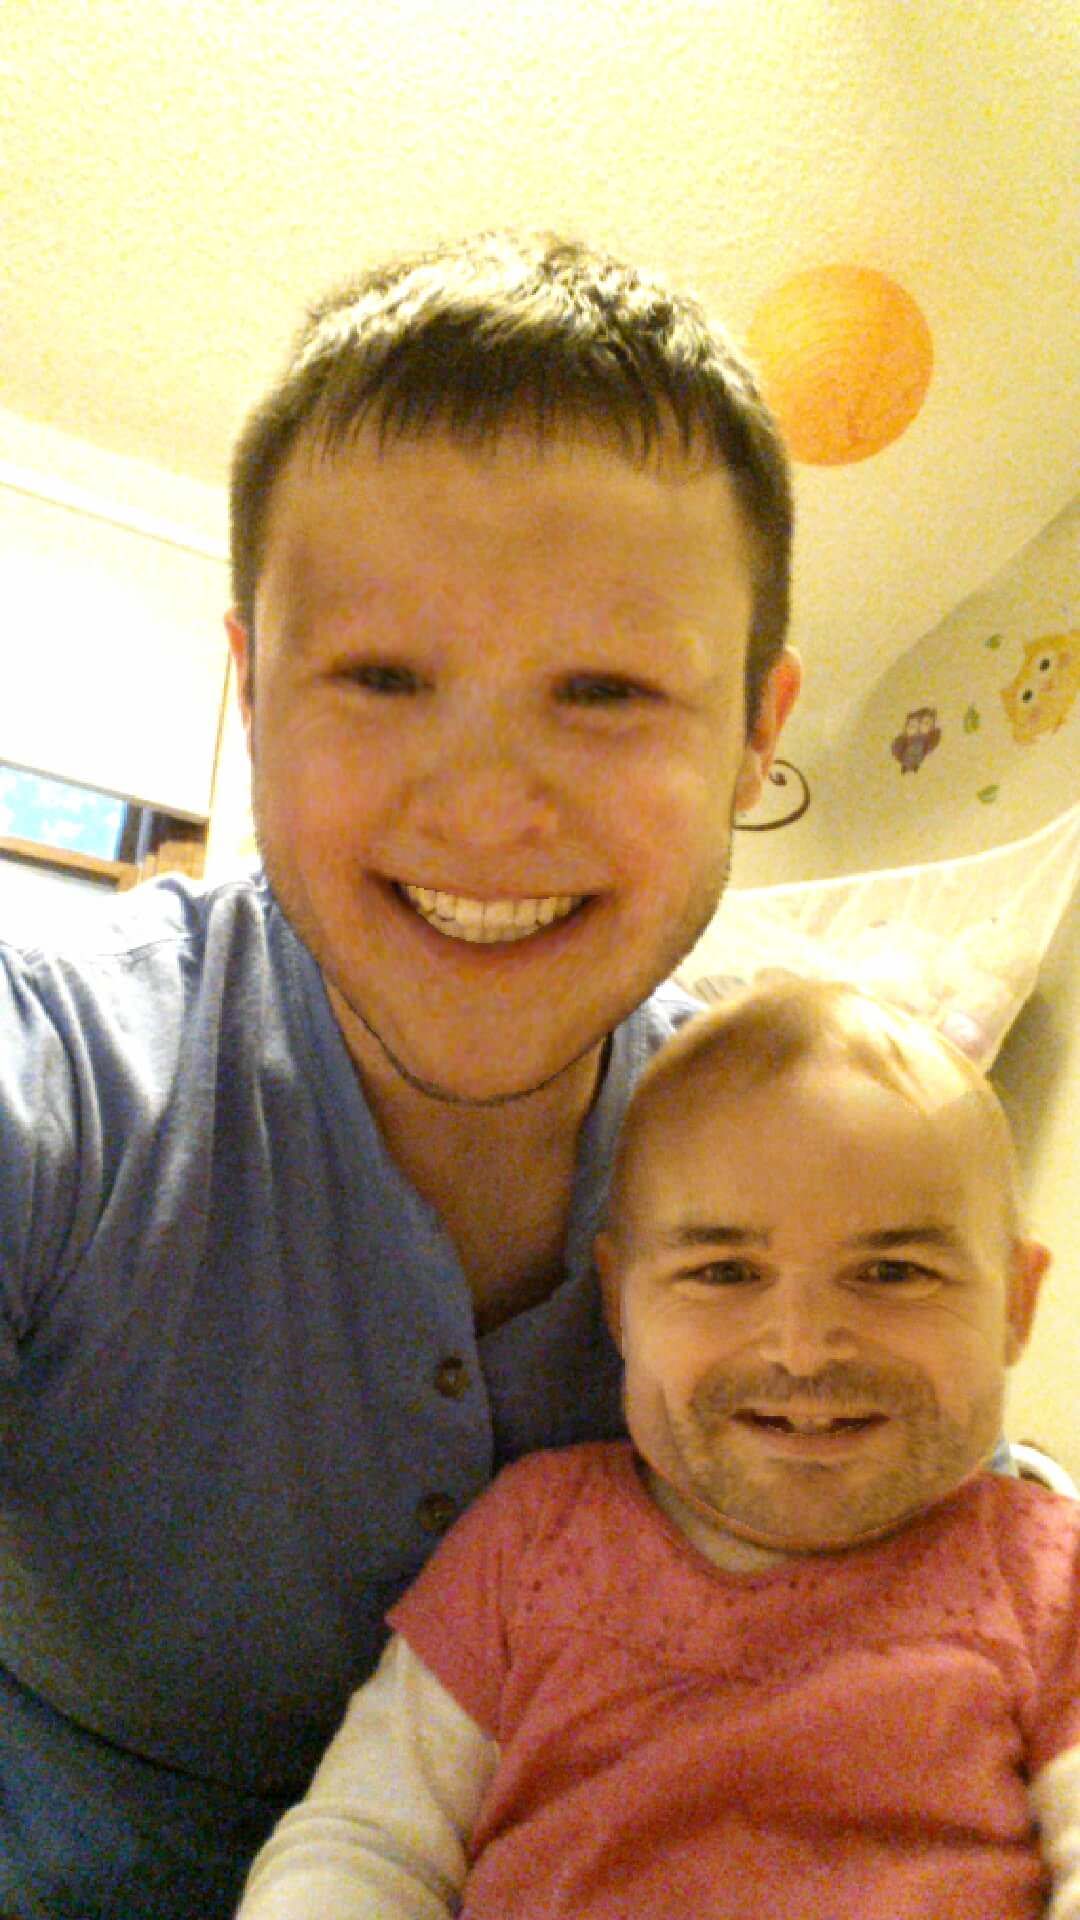 Face swapped with my 2 year old. Just because we can do a thing doesn't mean we should :P